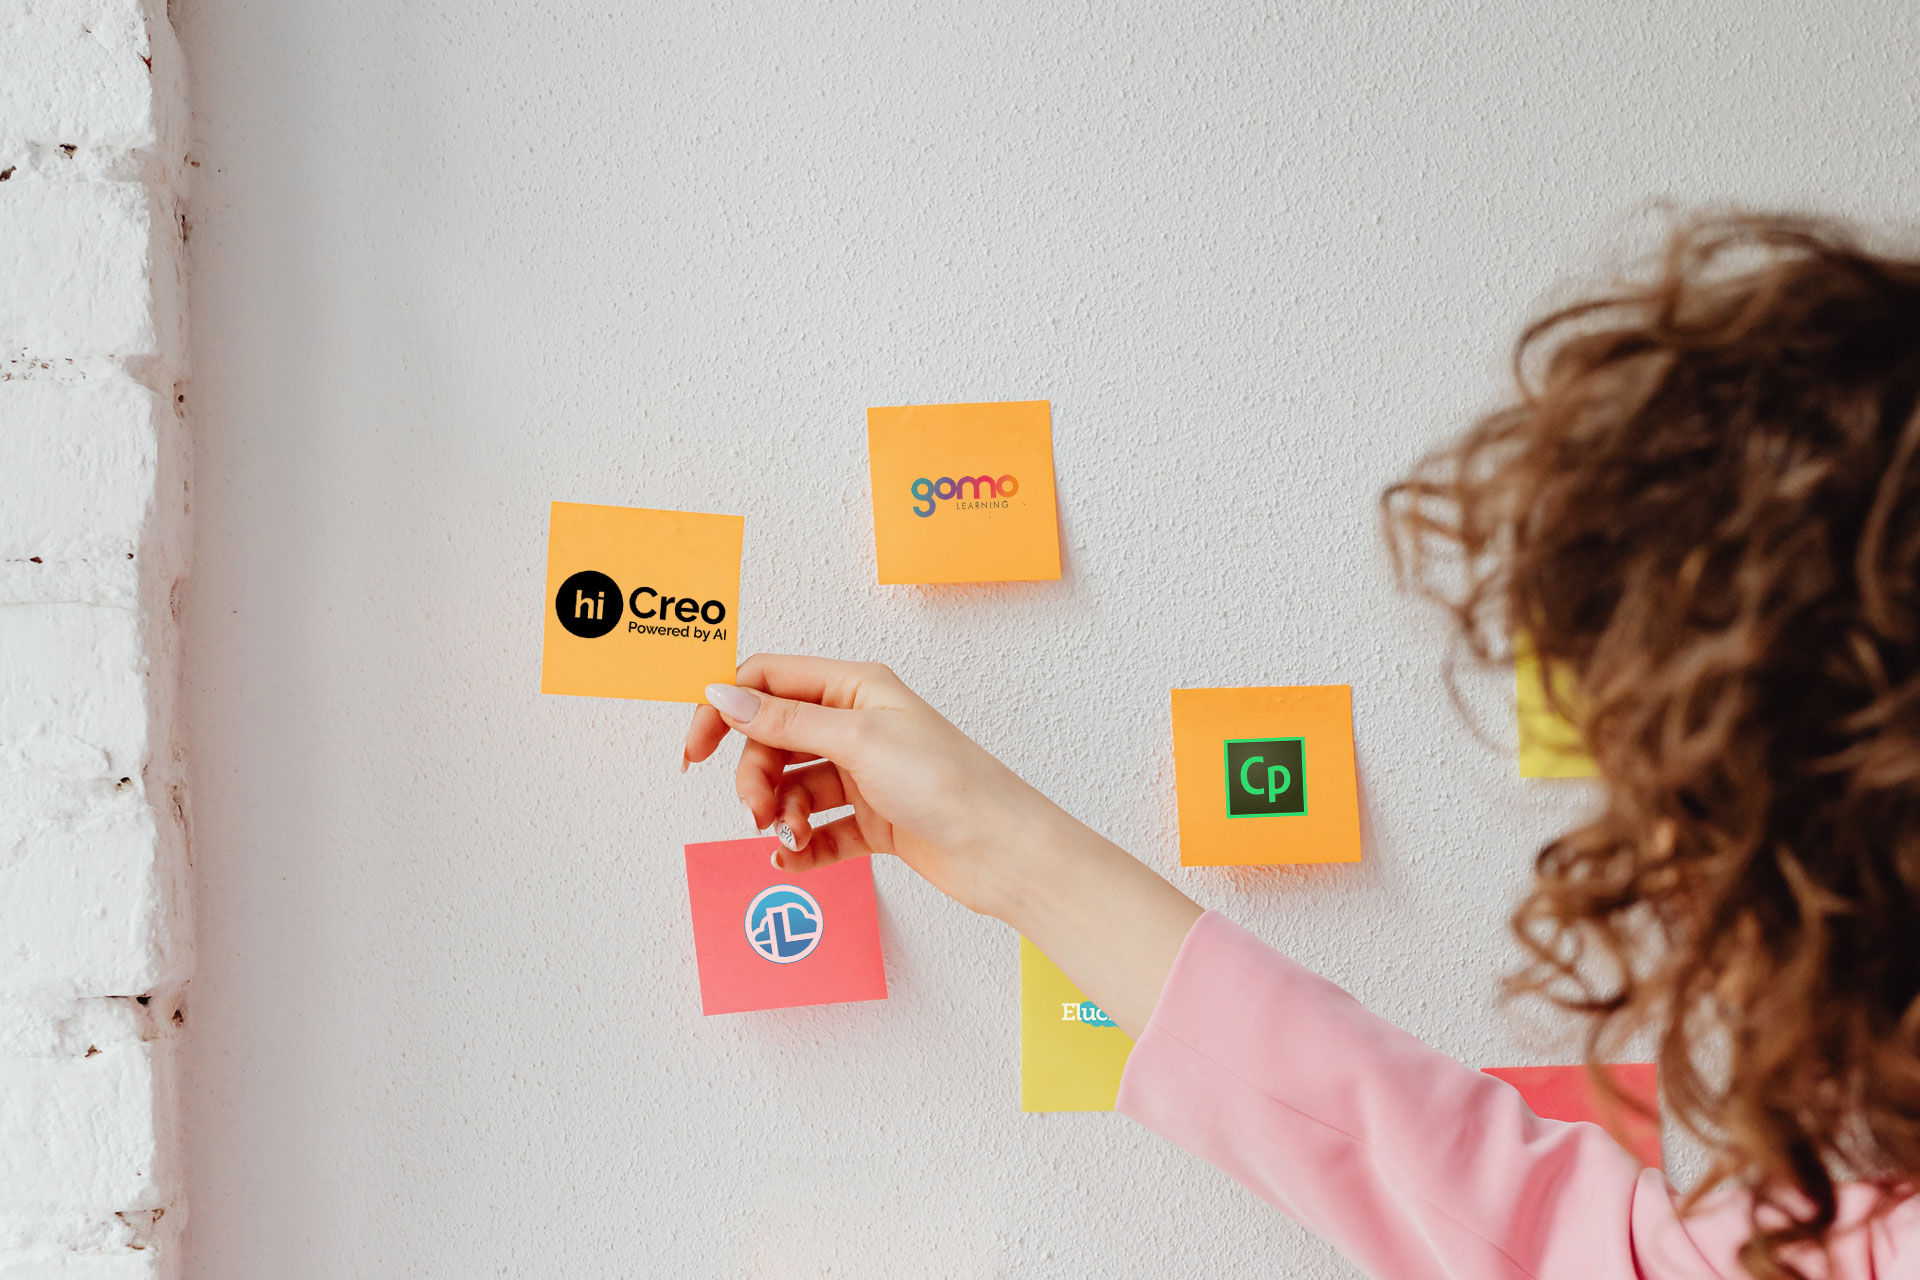 A woman is selecting a sticky note with the hiCreo logo from a wall covered with sticky notes. The other sticky notes on the wall have the logos of Captivate, Gomo, and Lectora, suggesting a comparison of the top 5 eLearning tools.